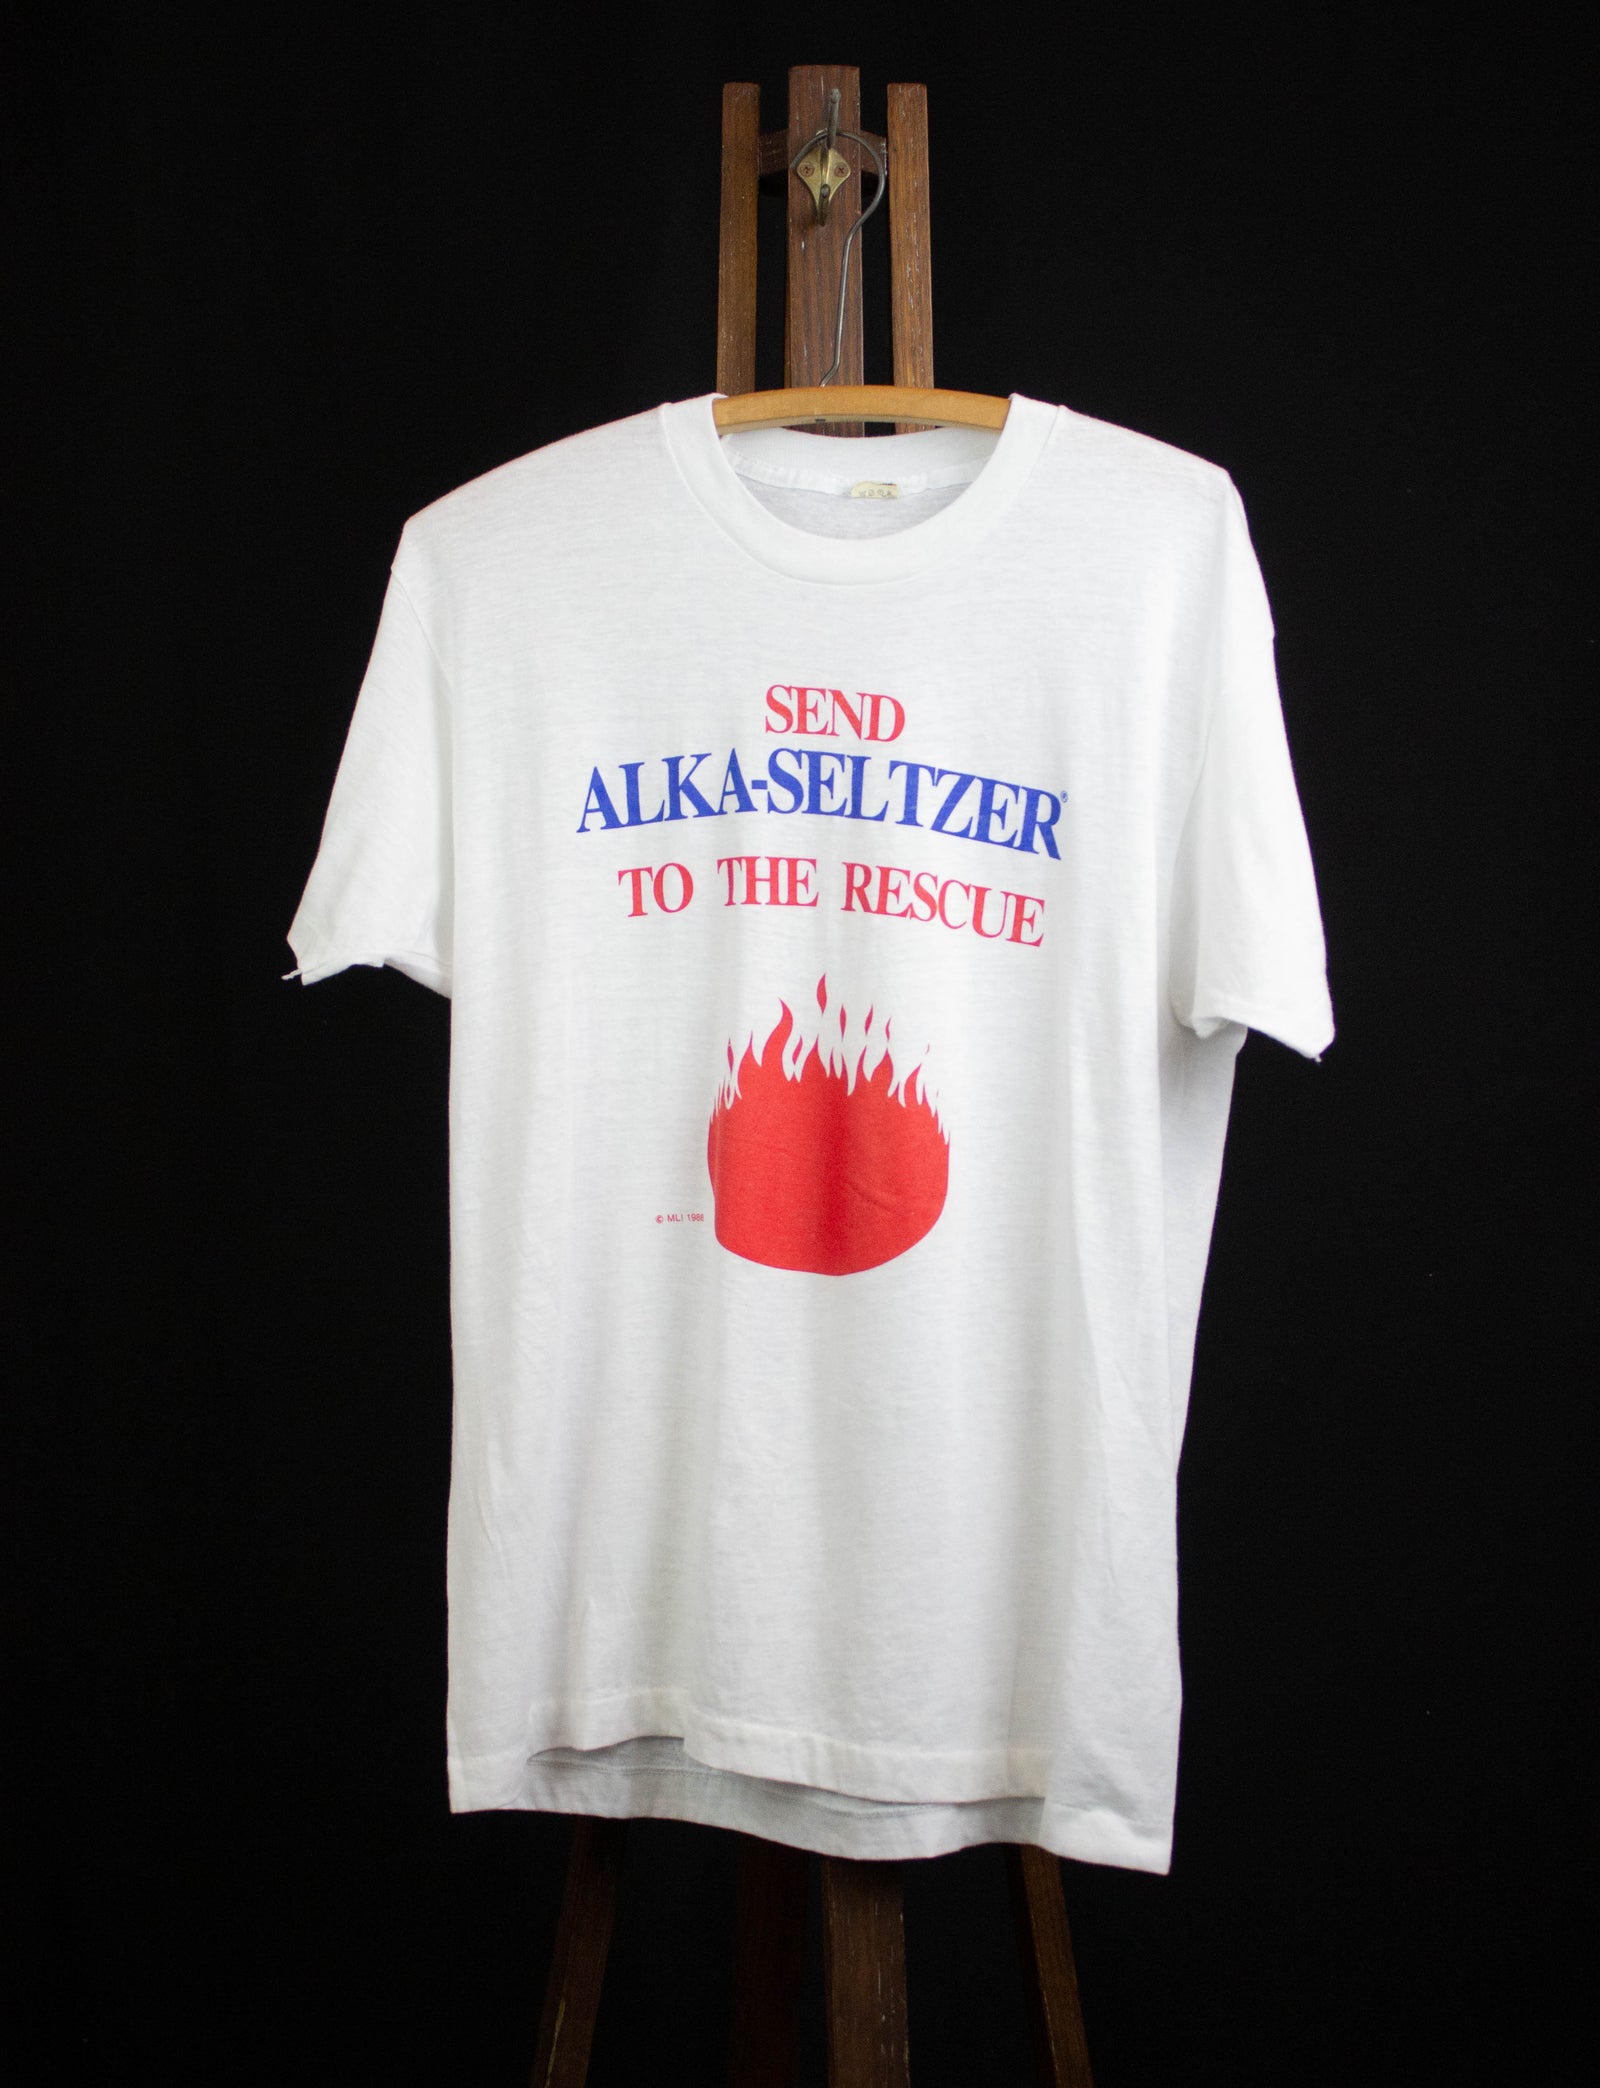 Vintage 1986 "Send Alka-Seltzer To The Rescue" Graphic T Shirt White Large